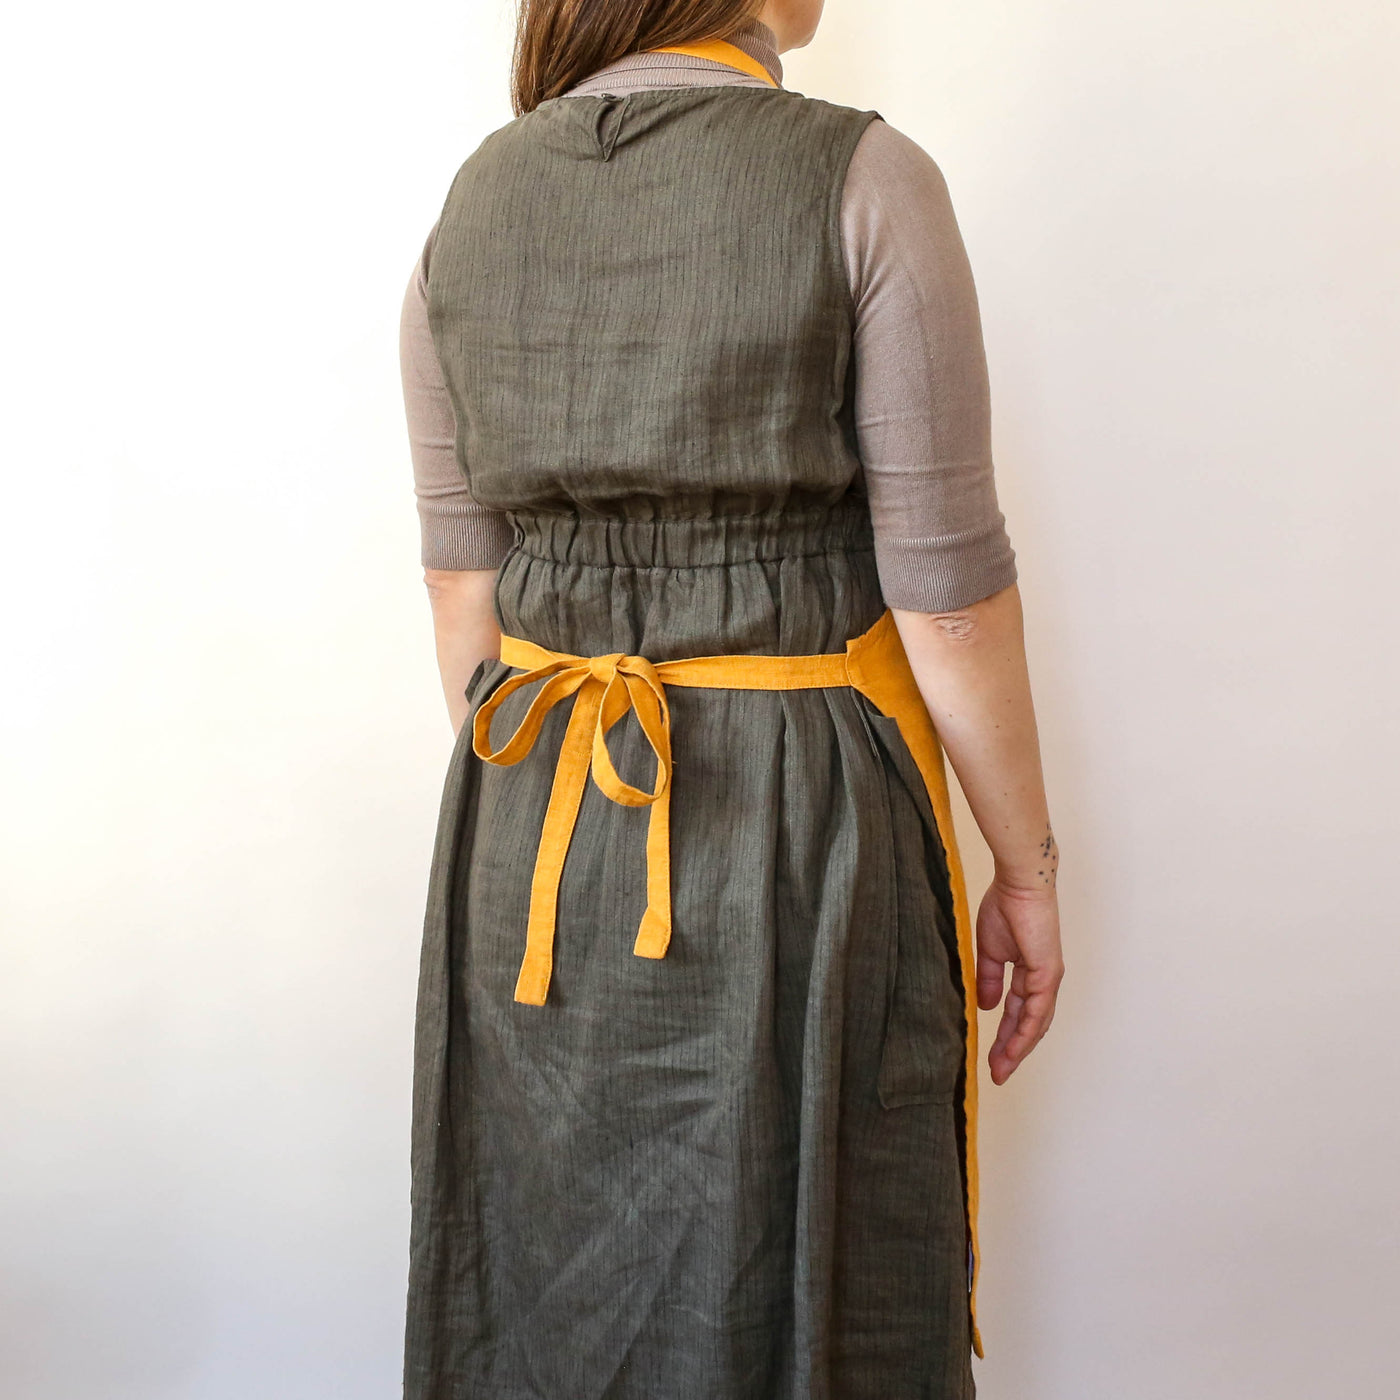 Washed Linen Classic Apron - Mustard